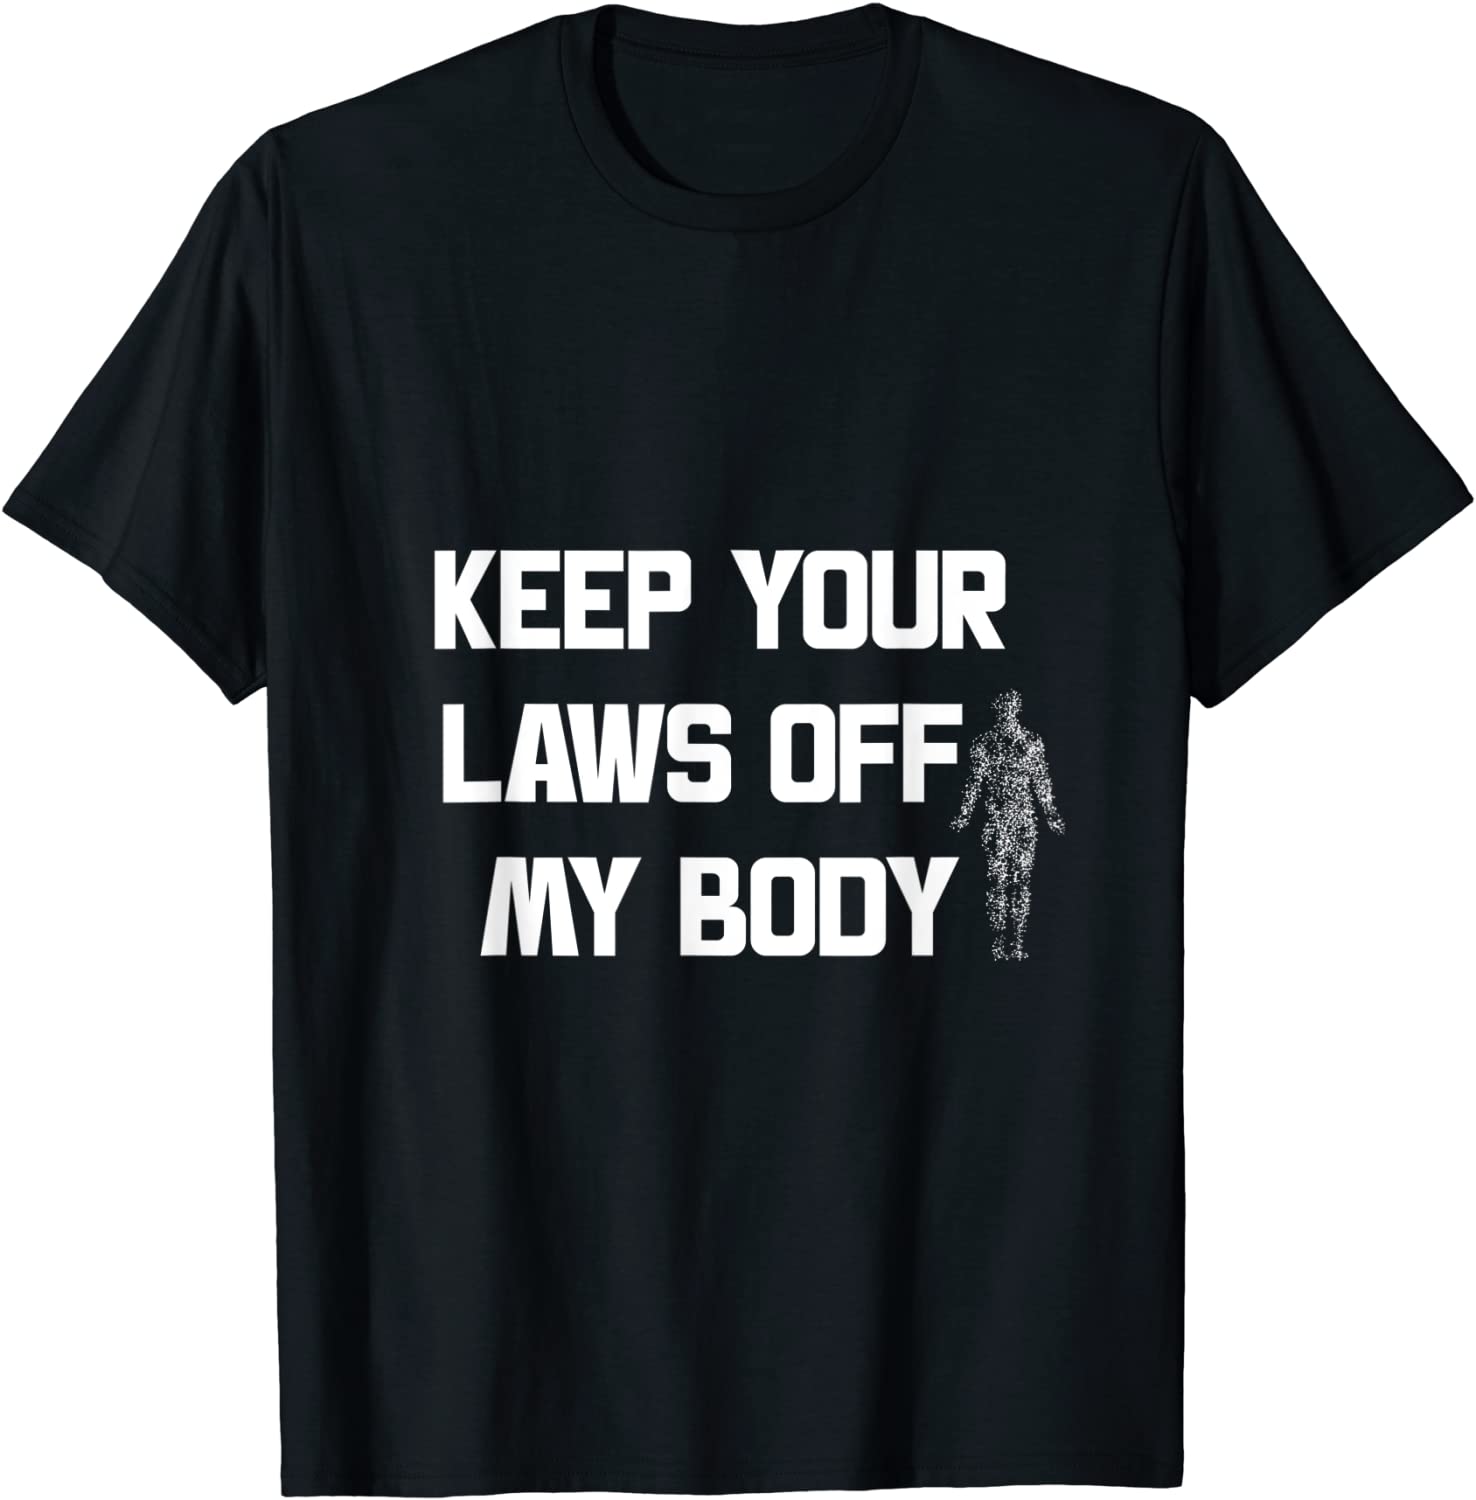 Keep Your Laws Off My Body, My choice Unisex T-Shirt - ShirtsMango Office